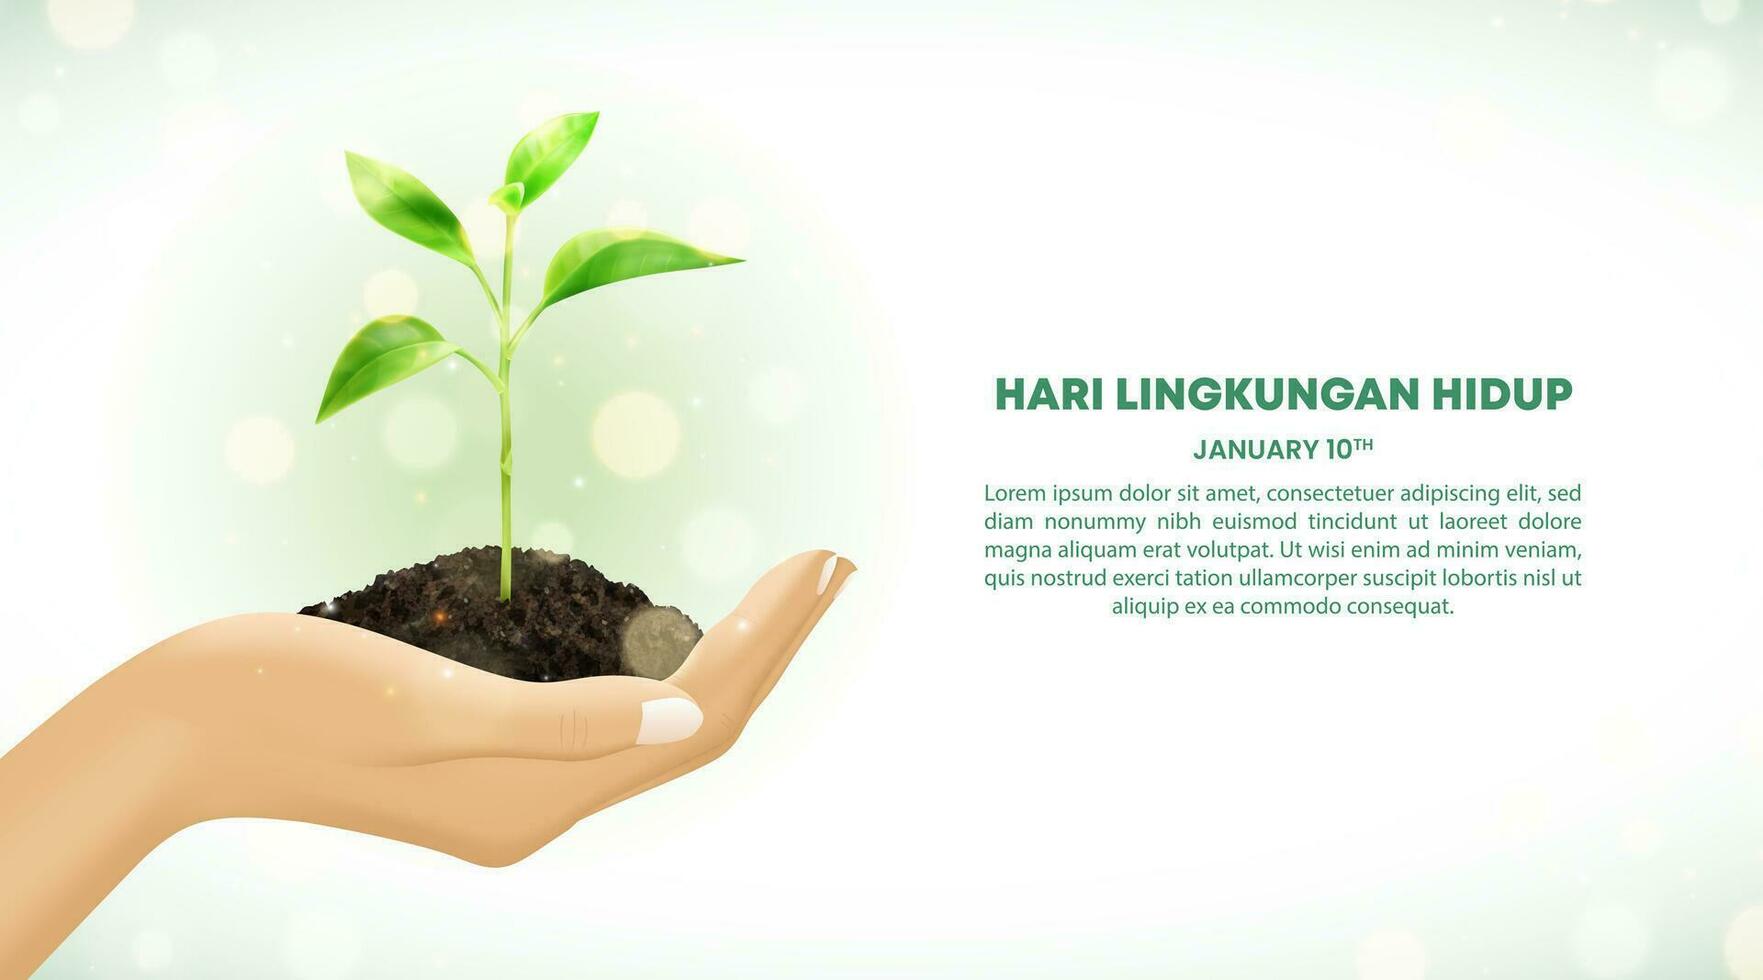 Hari Lingkungan Hidup Indonesia or Indonesian Environment Day background with a hand holding a plant vector